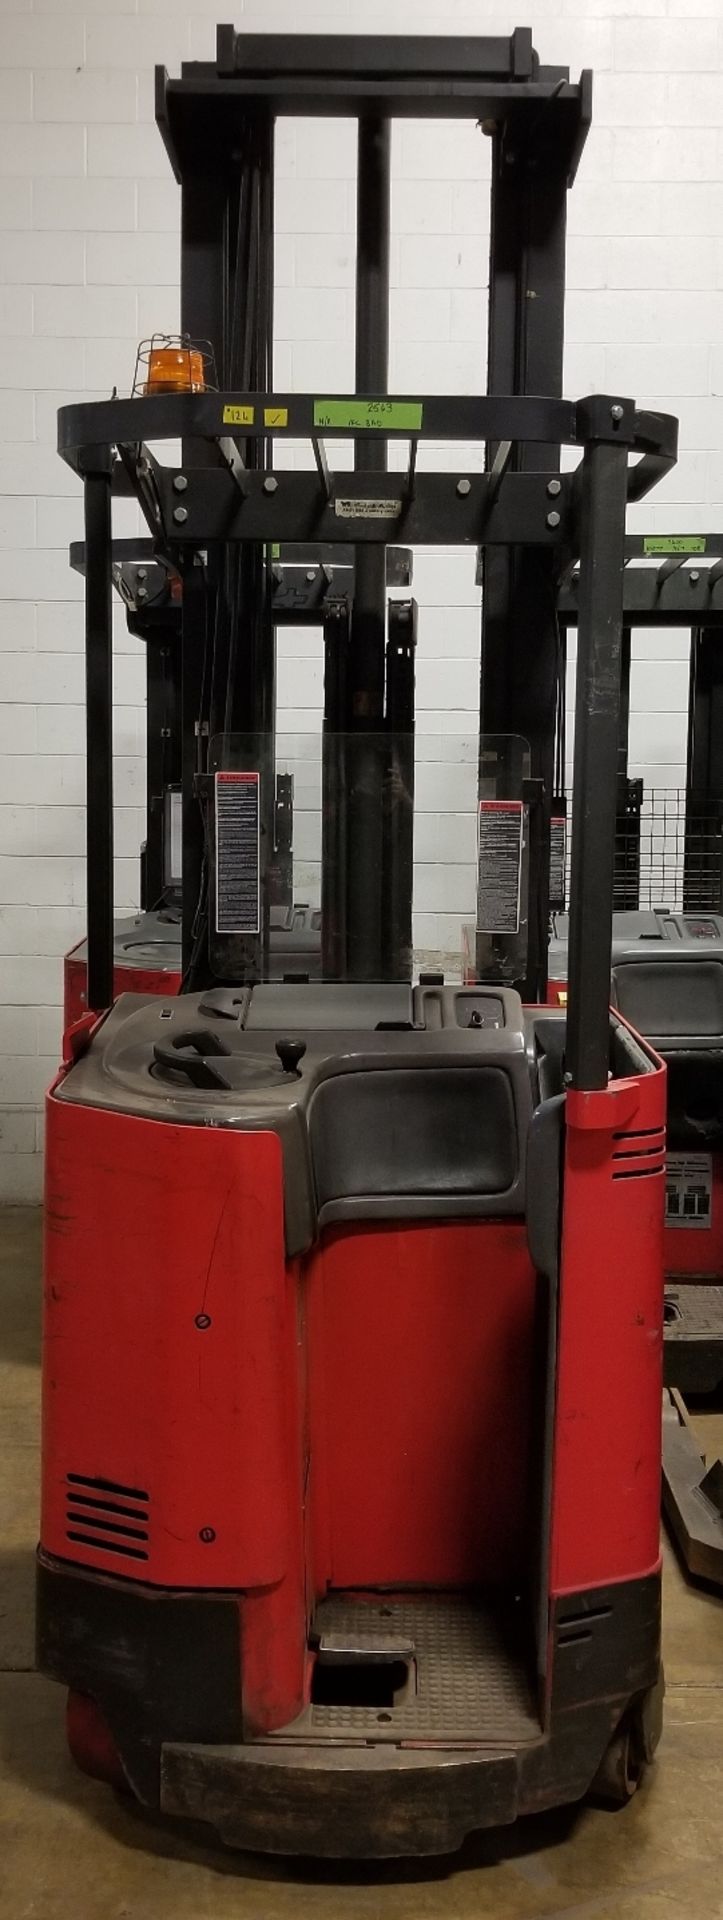 RAYMOND (1994) EZ-R40TT 36V ELECTRIC REACH TRUCK WITH 4000 LB. CAPACITY, 286" MAX. VERTICAL LIFT, - Image 3 of 3